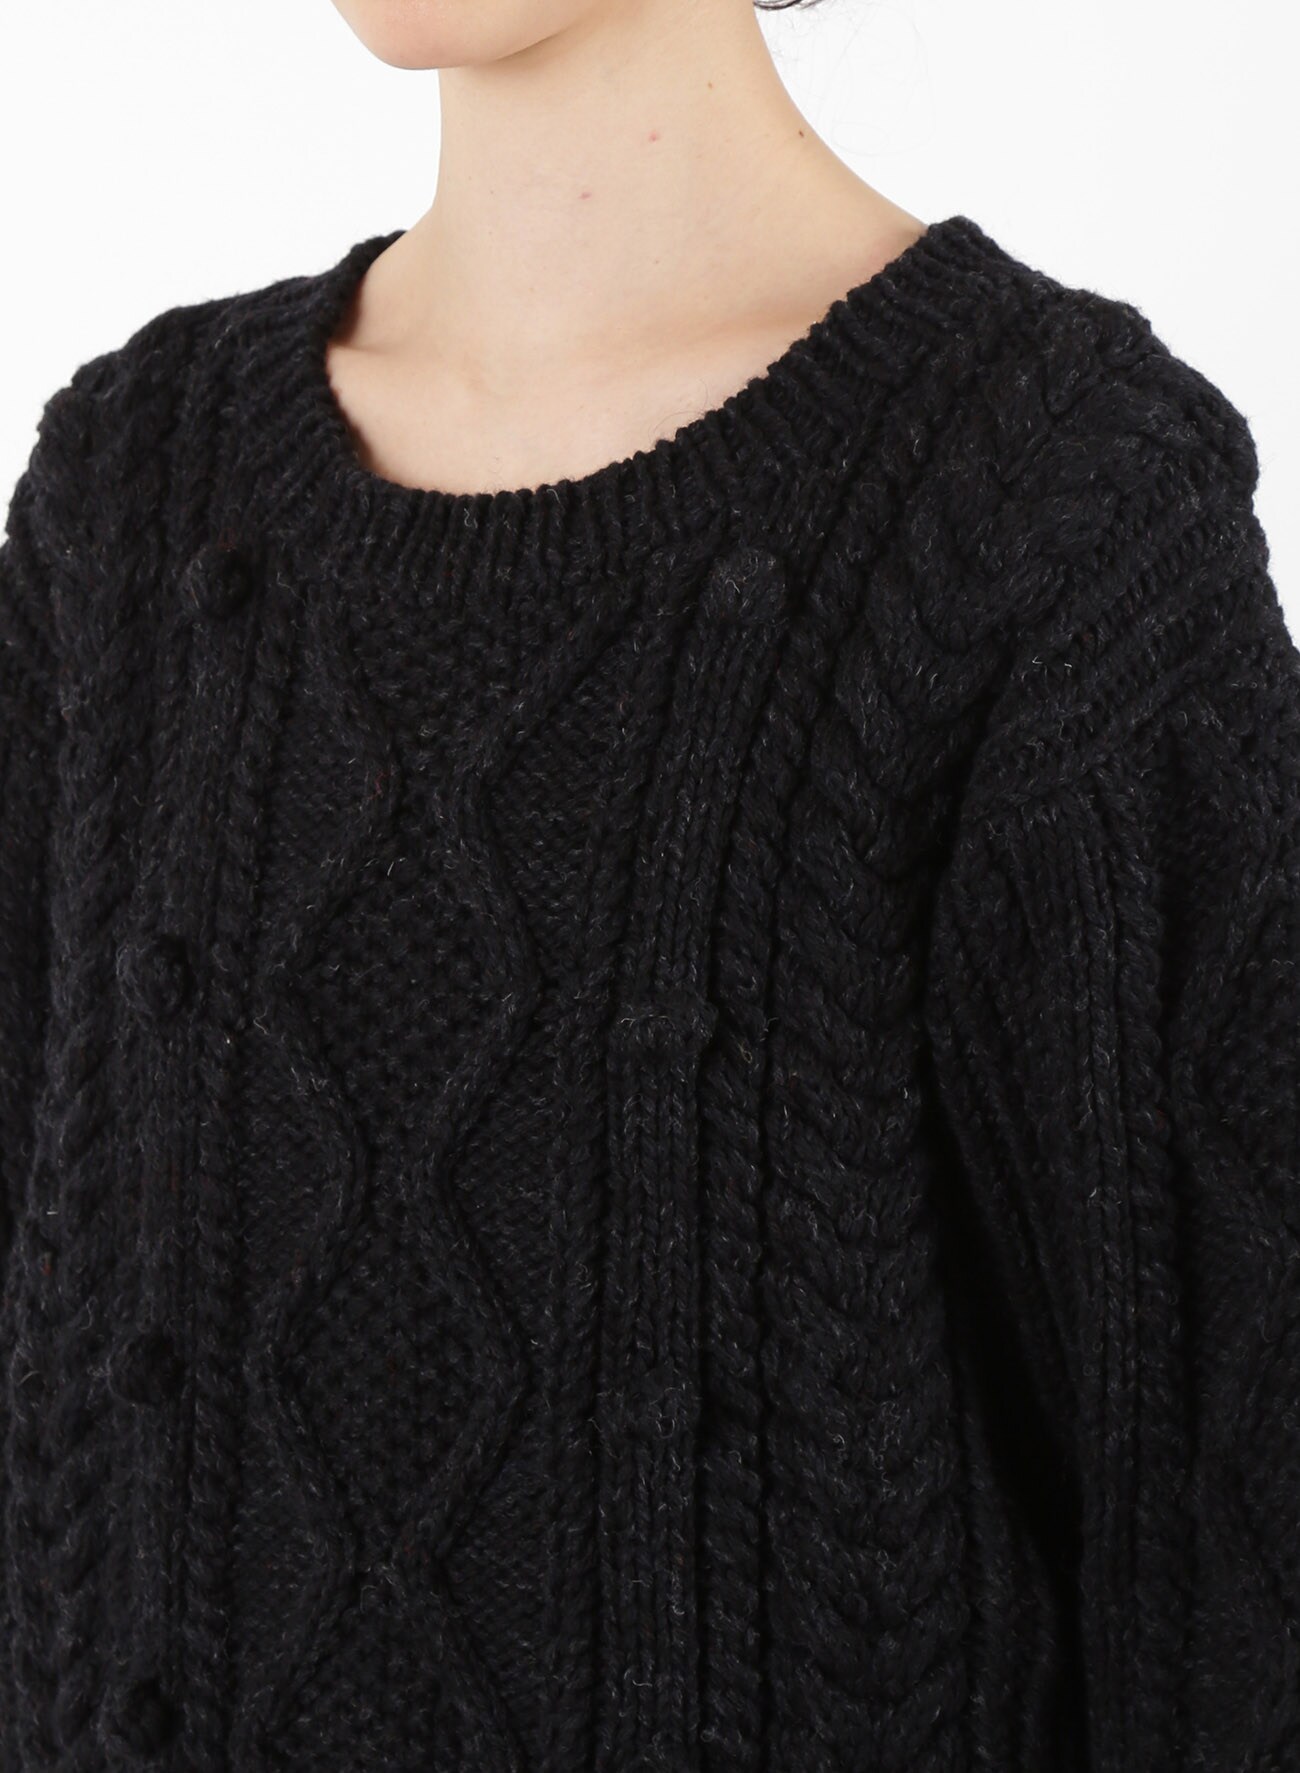 HAND-KNITTED ALLAN PATTRN ROUND NECK PULLOVER(S Charcoal): Vintage